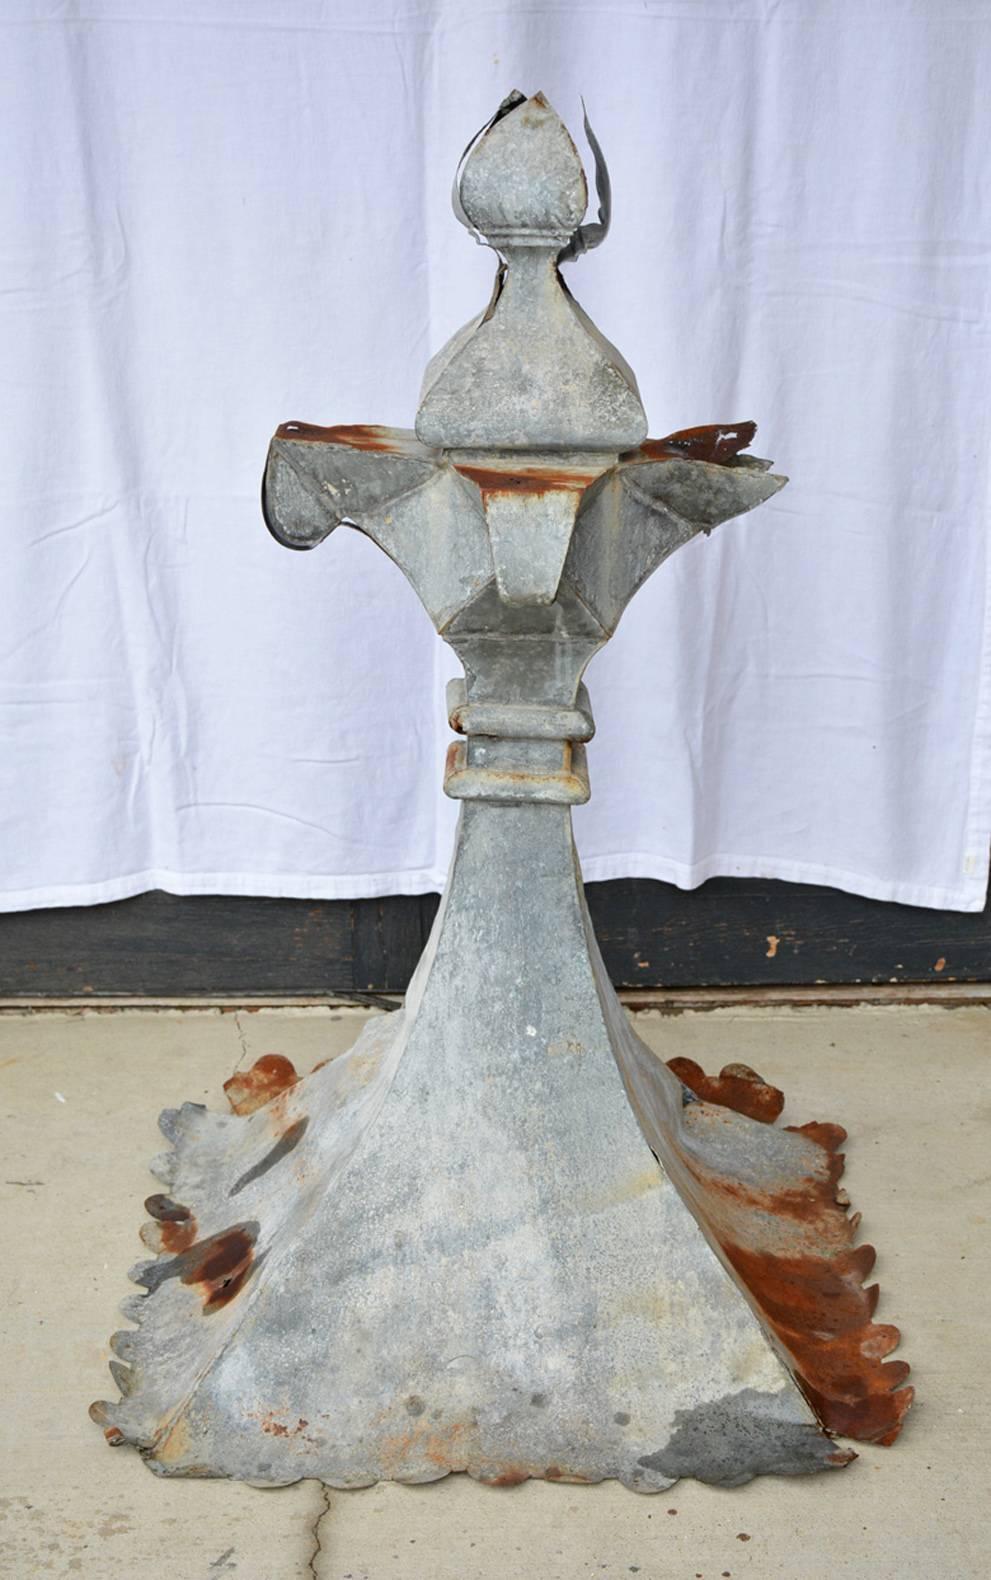 Antique zinc finial has small scallops around the bottom with holes for nails or screws when it was once attached to a building.
Great as garden element of architectural interest.